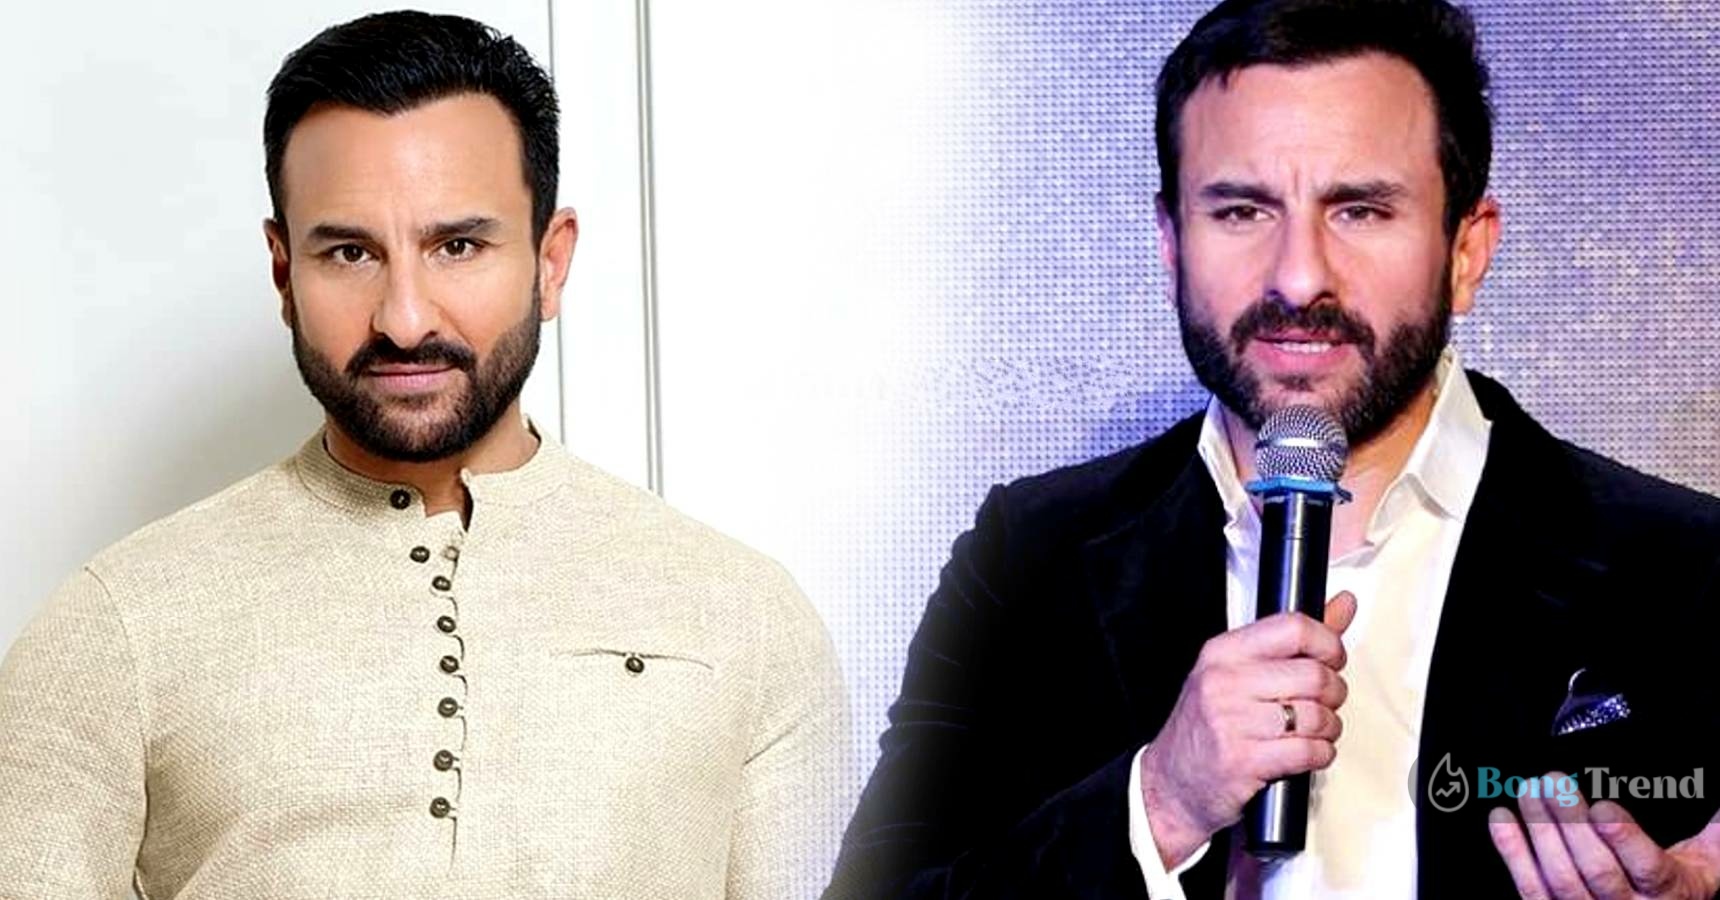 When Saif Ali Khan opened up about nepotism in Bollywood